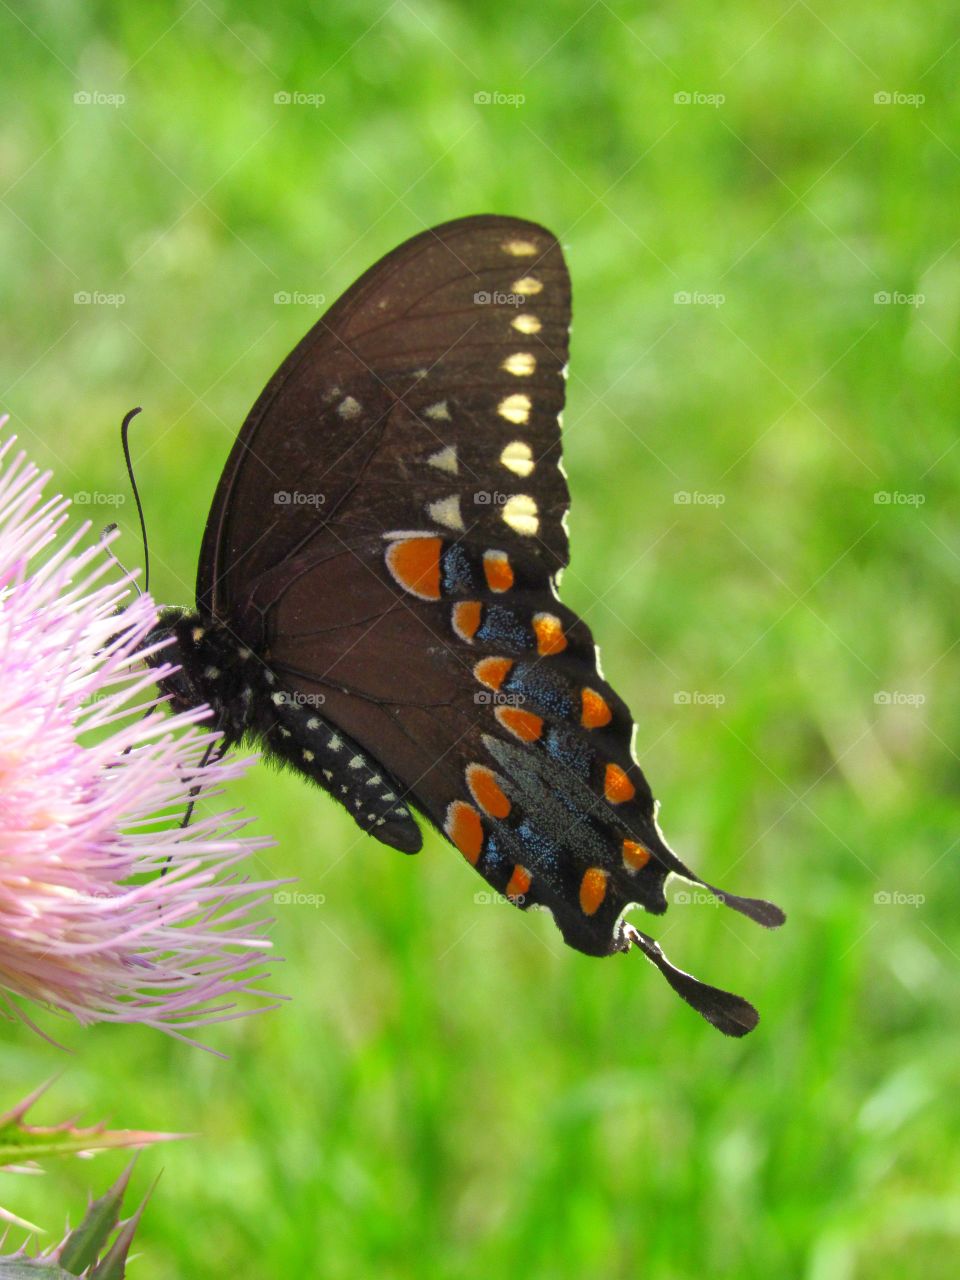 swallowtail butterfly on thistle flower outdoors